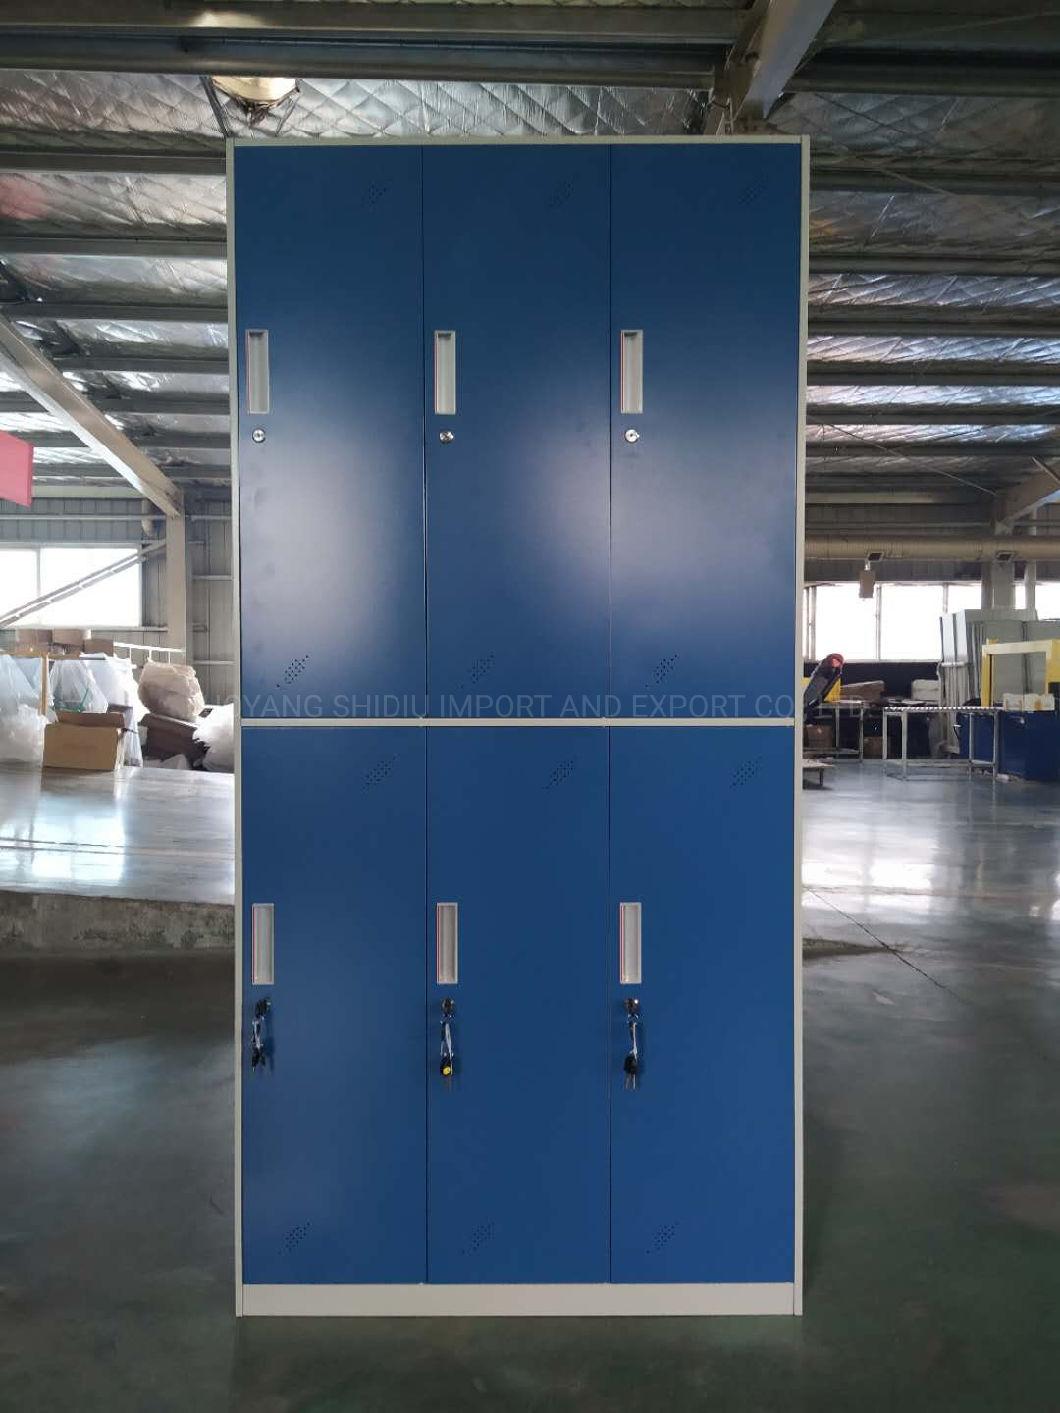 6 Doors Metal Garments Locker for Changing Room for Employees